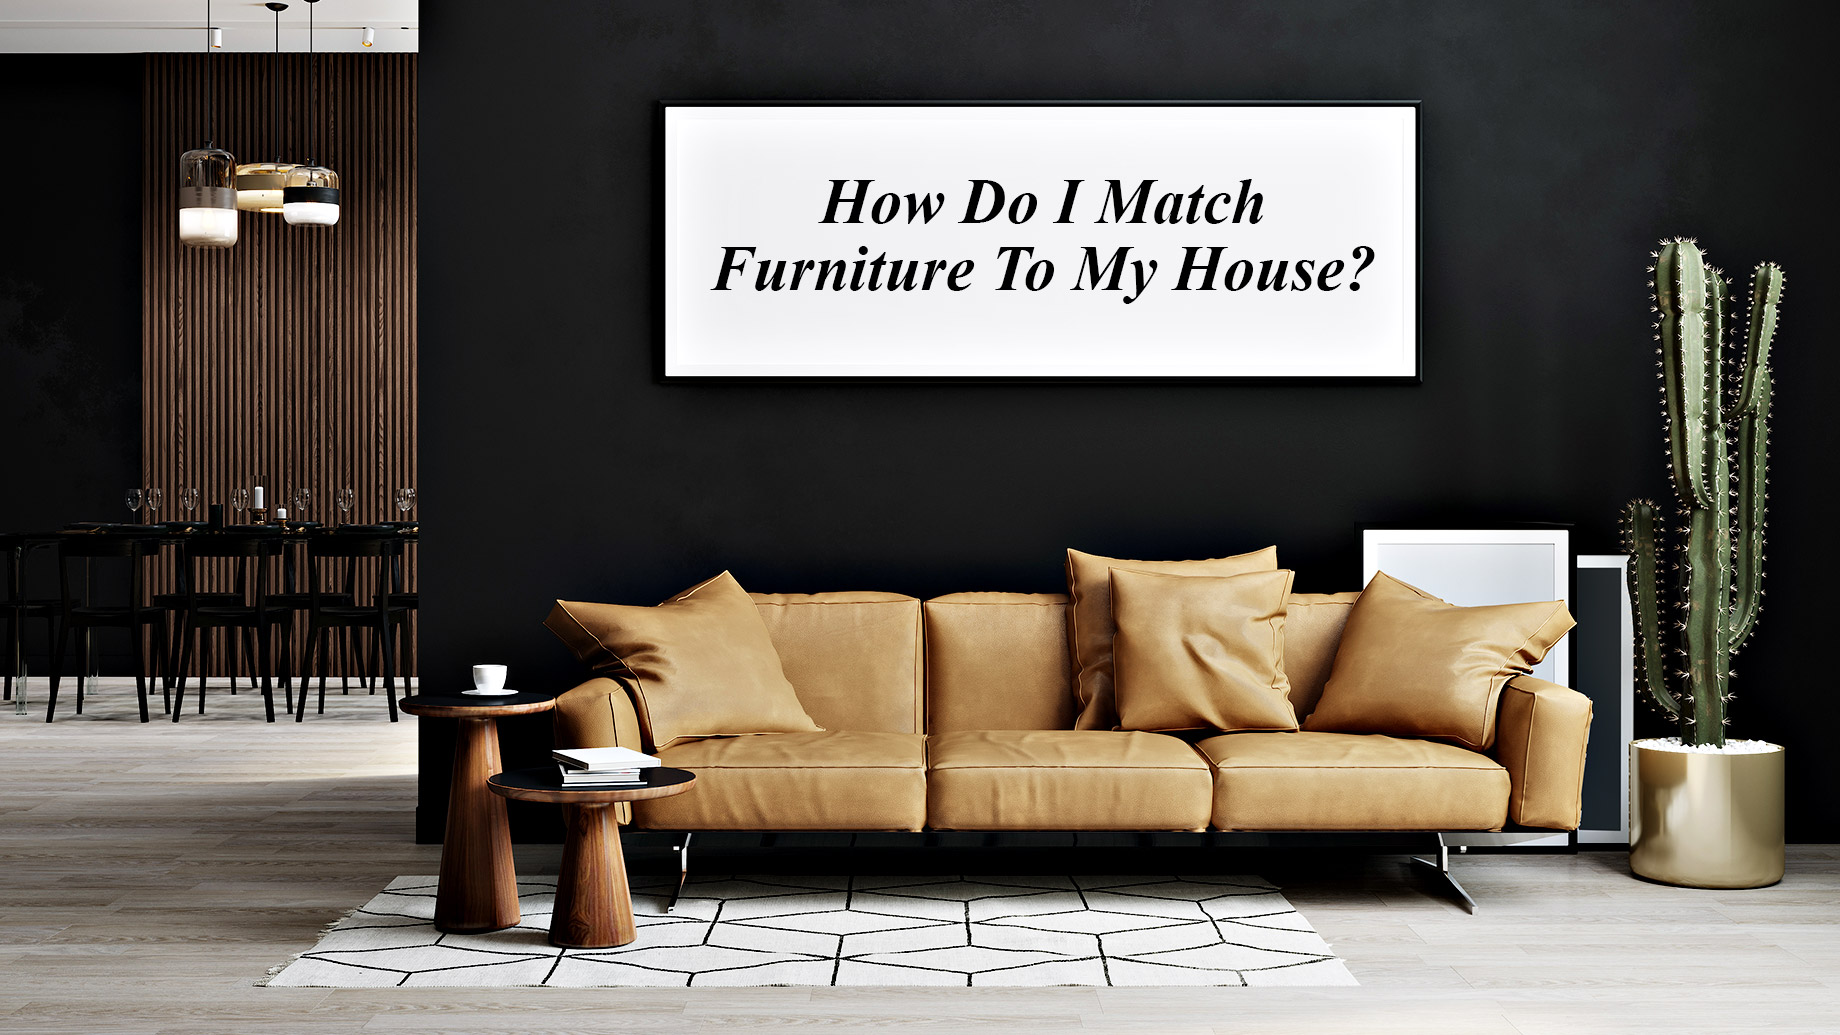 How Do I Match Furniture To My House?